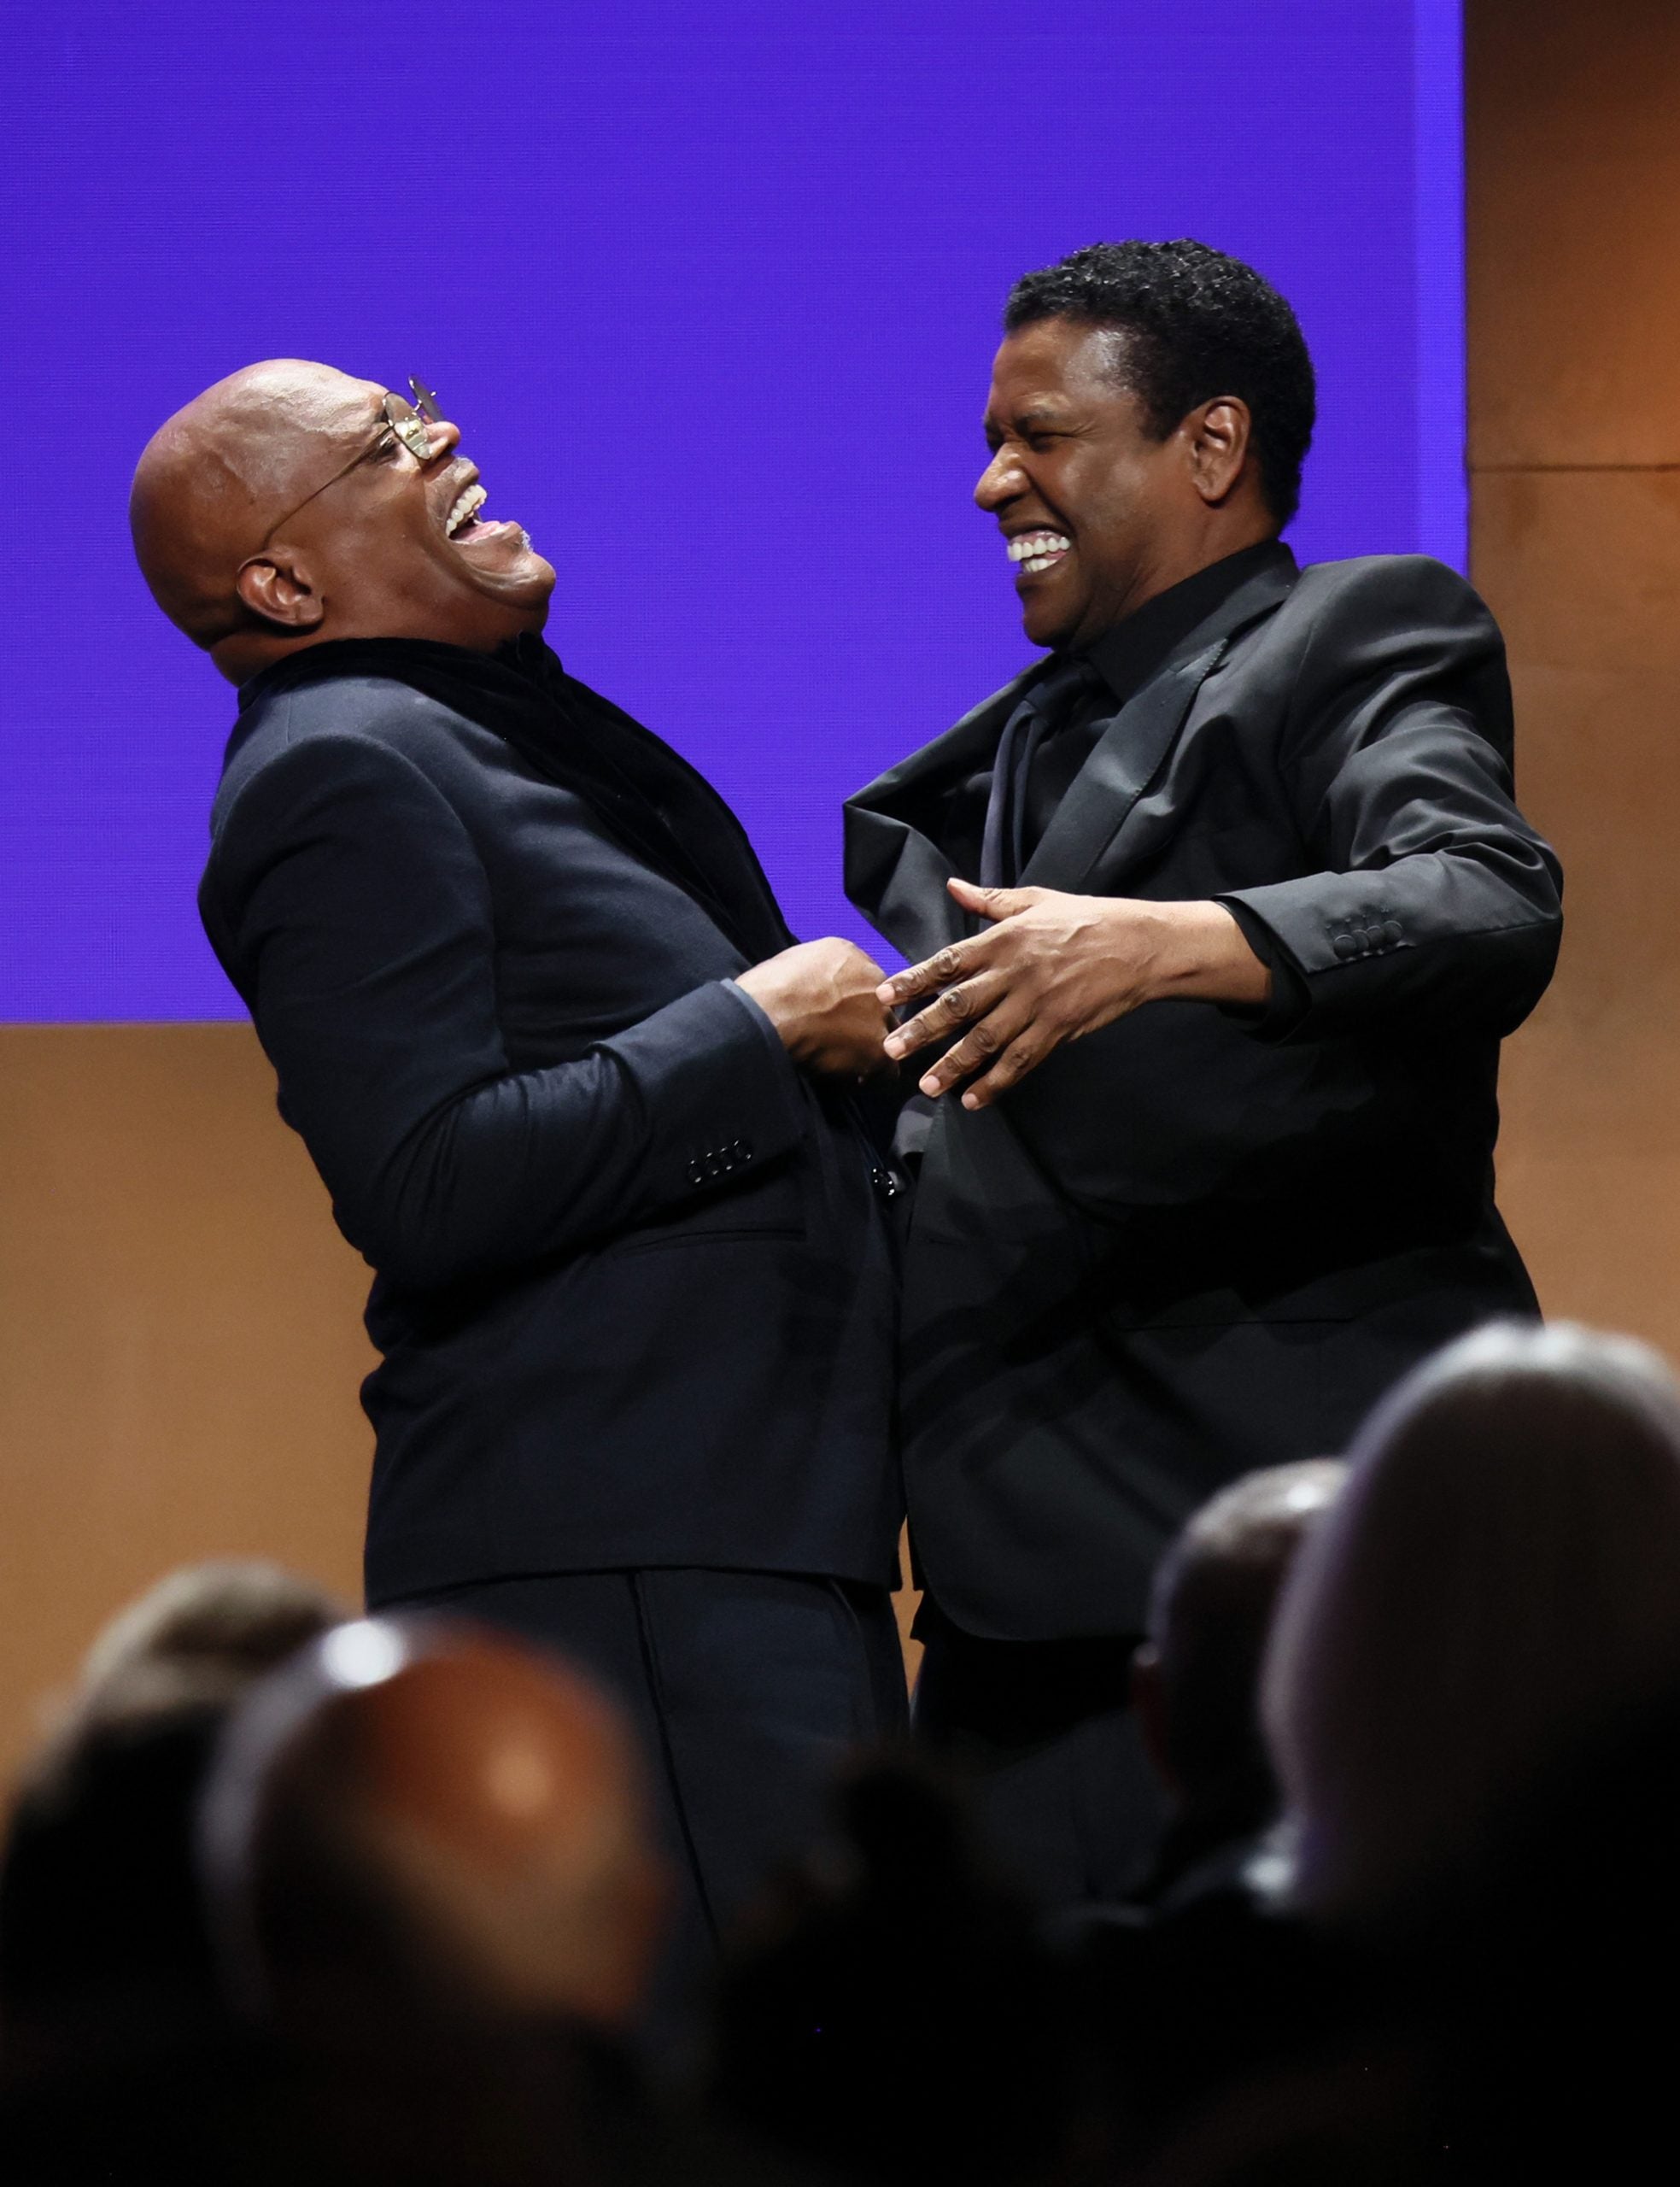 The Brotherhood Is Strong Between Denzel Washington And Samuel L. Jackson At The Governor’s Awards